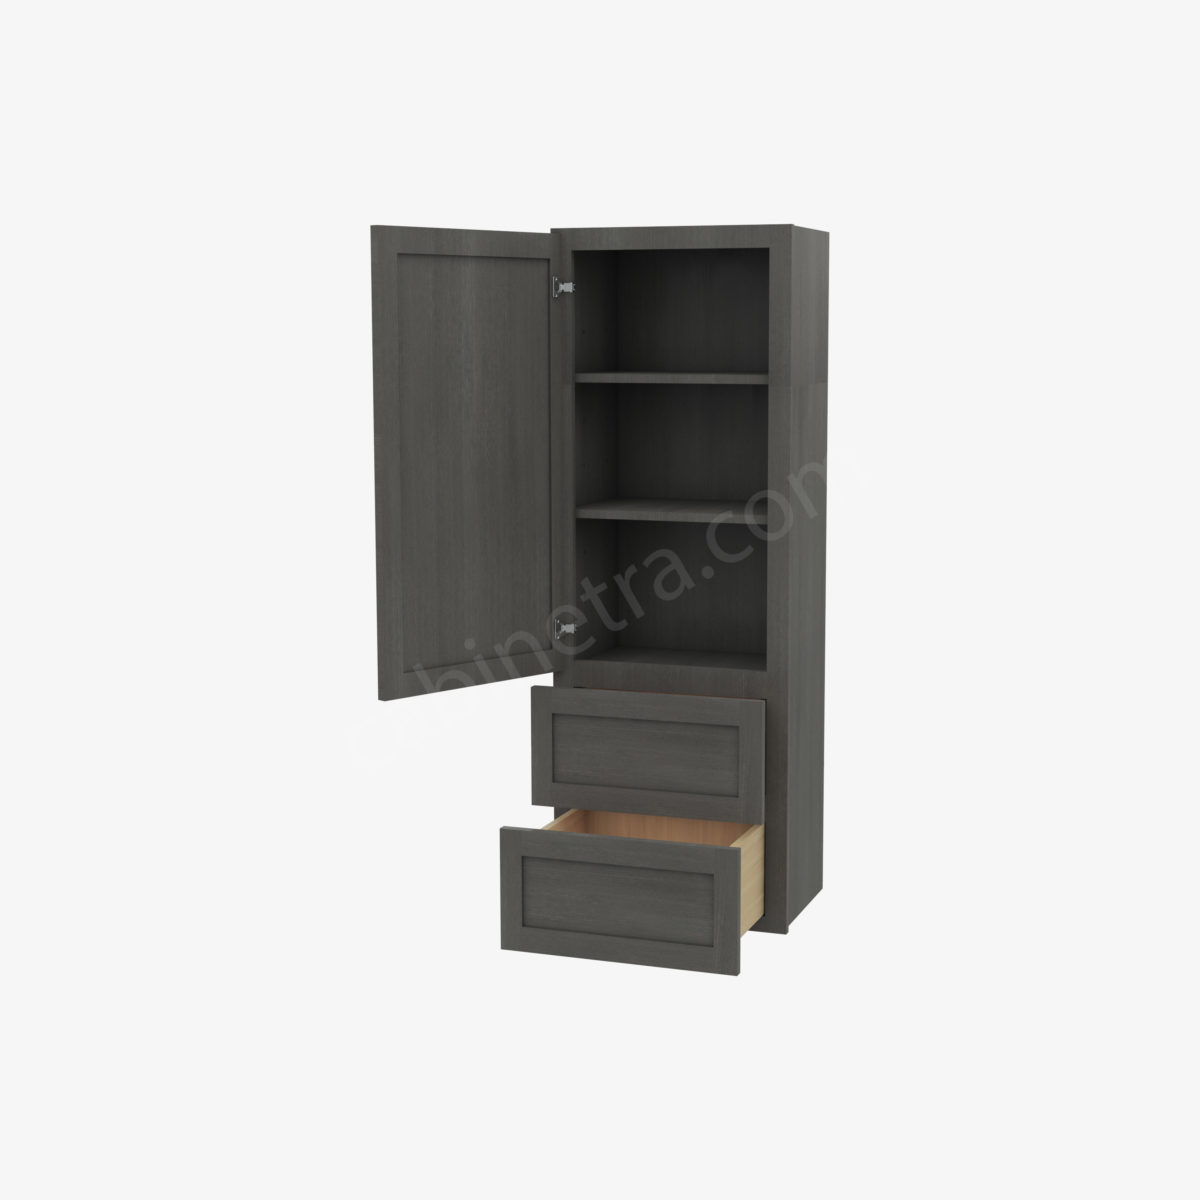 AG W2D1854 5 Forevermark Greystone Shaker Cabinetra scaled